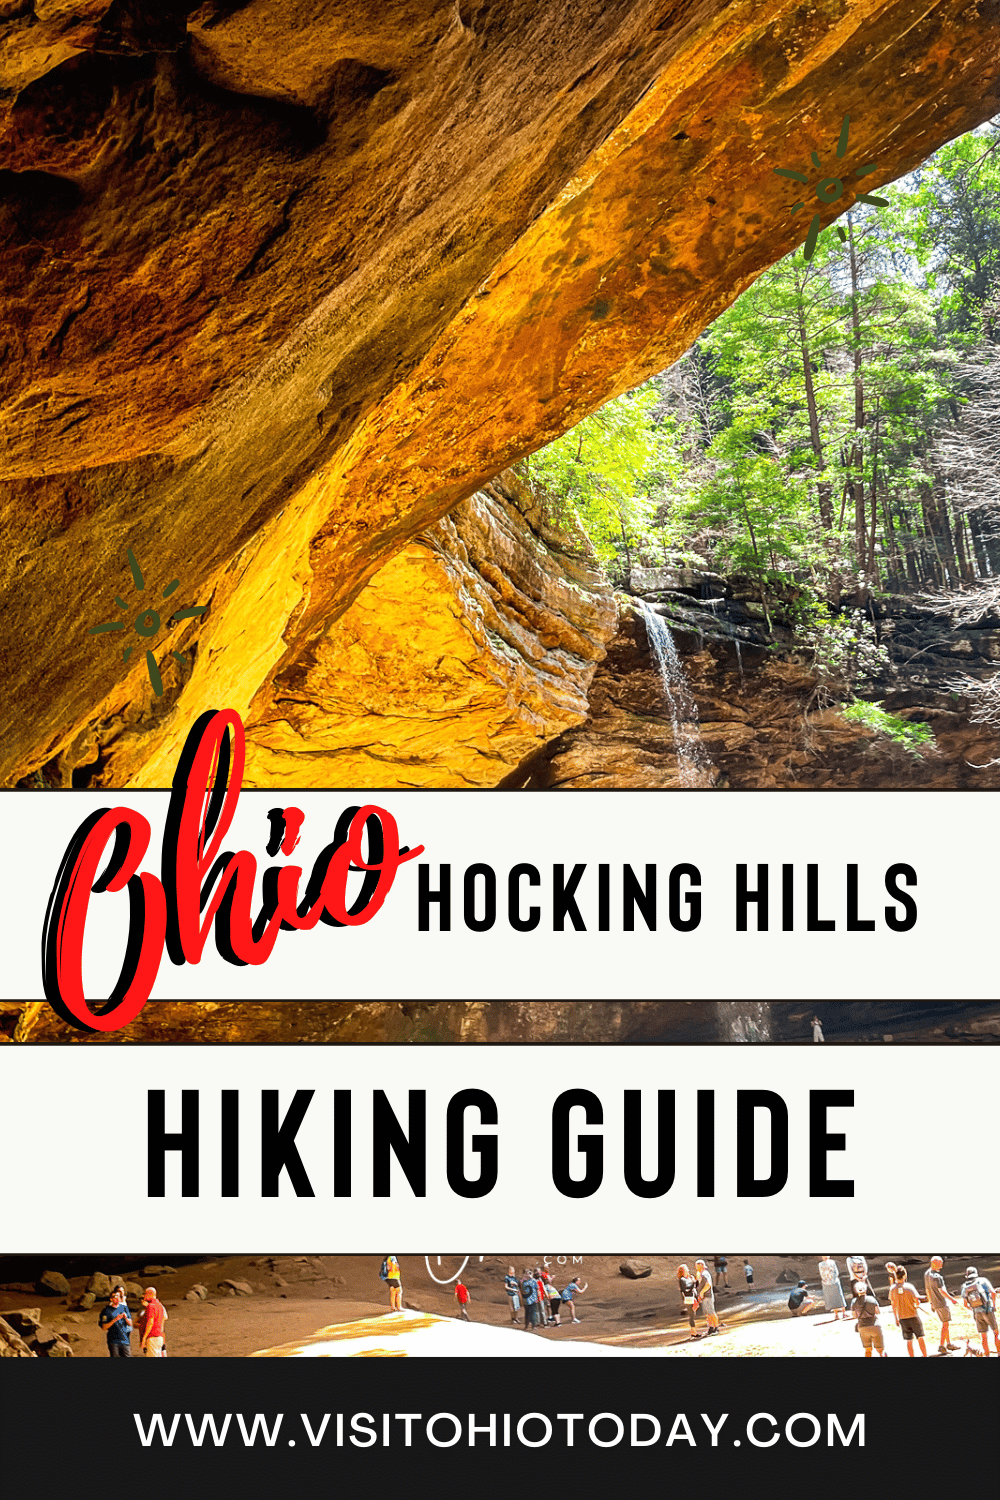 The Hocking Hills area has 7 major hiking spots! All of which are super unique! Read on to learn more about Hocking Hills Hiking!